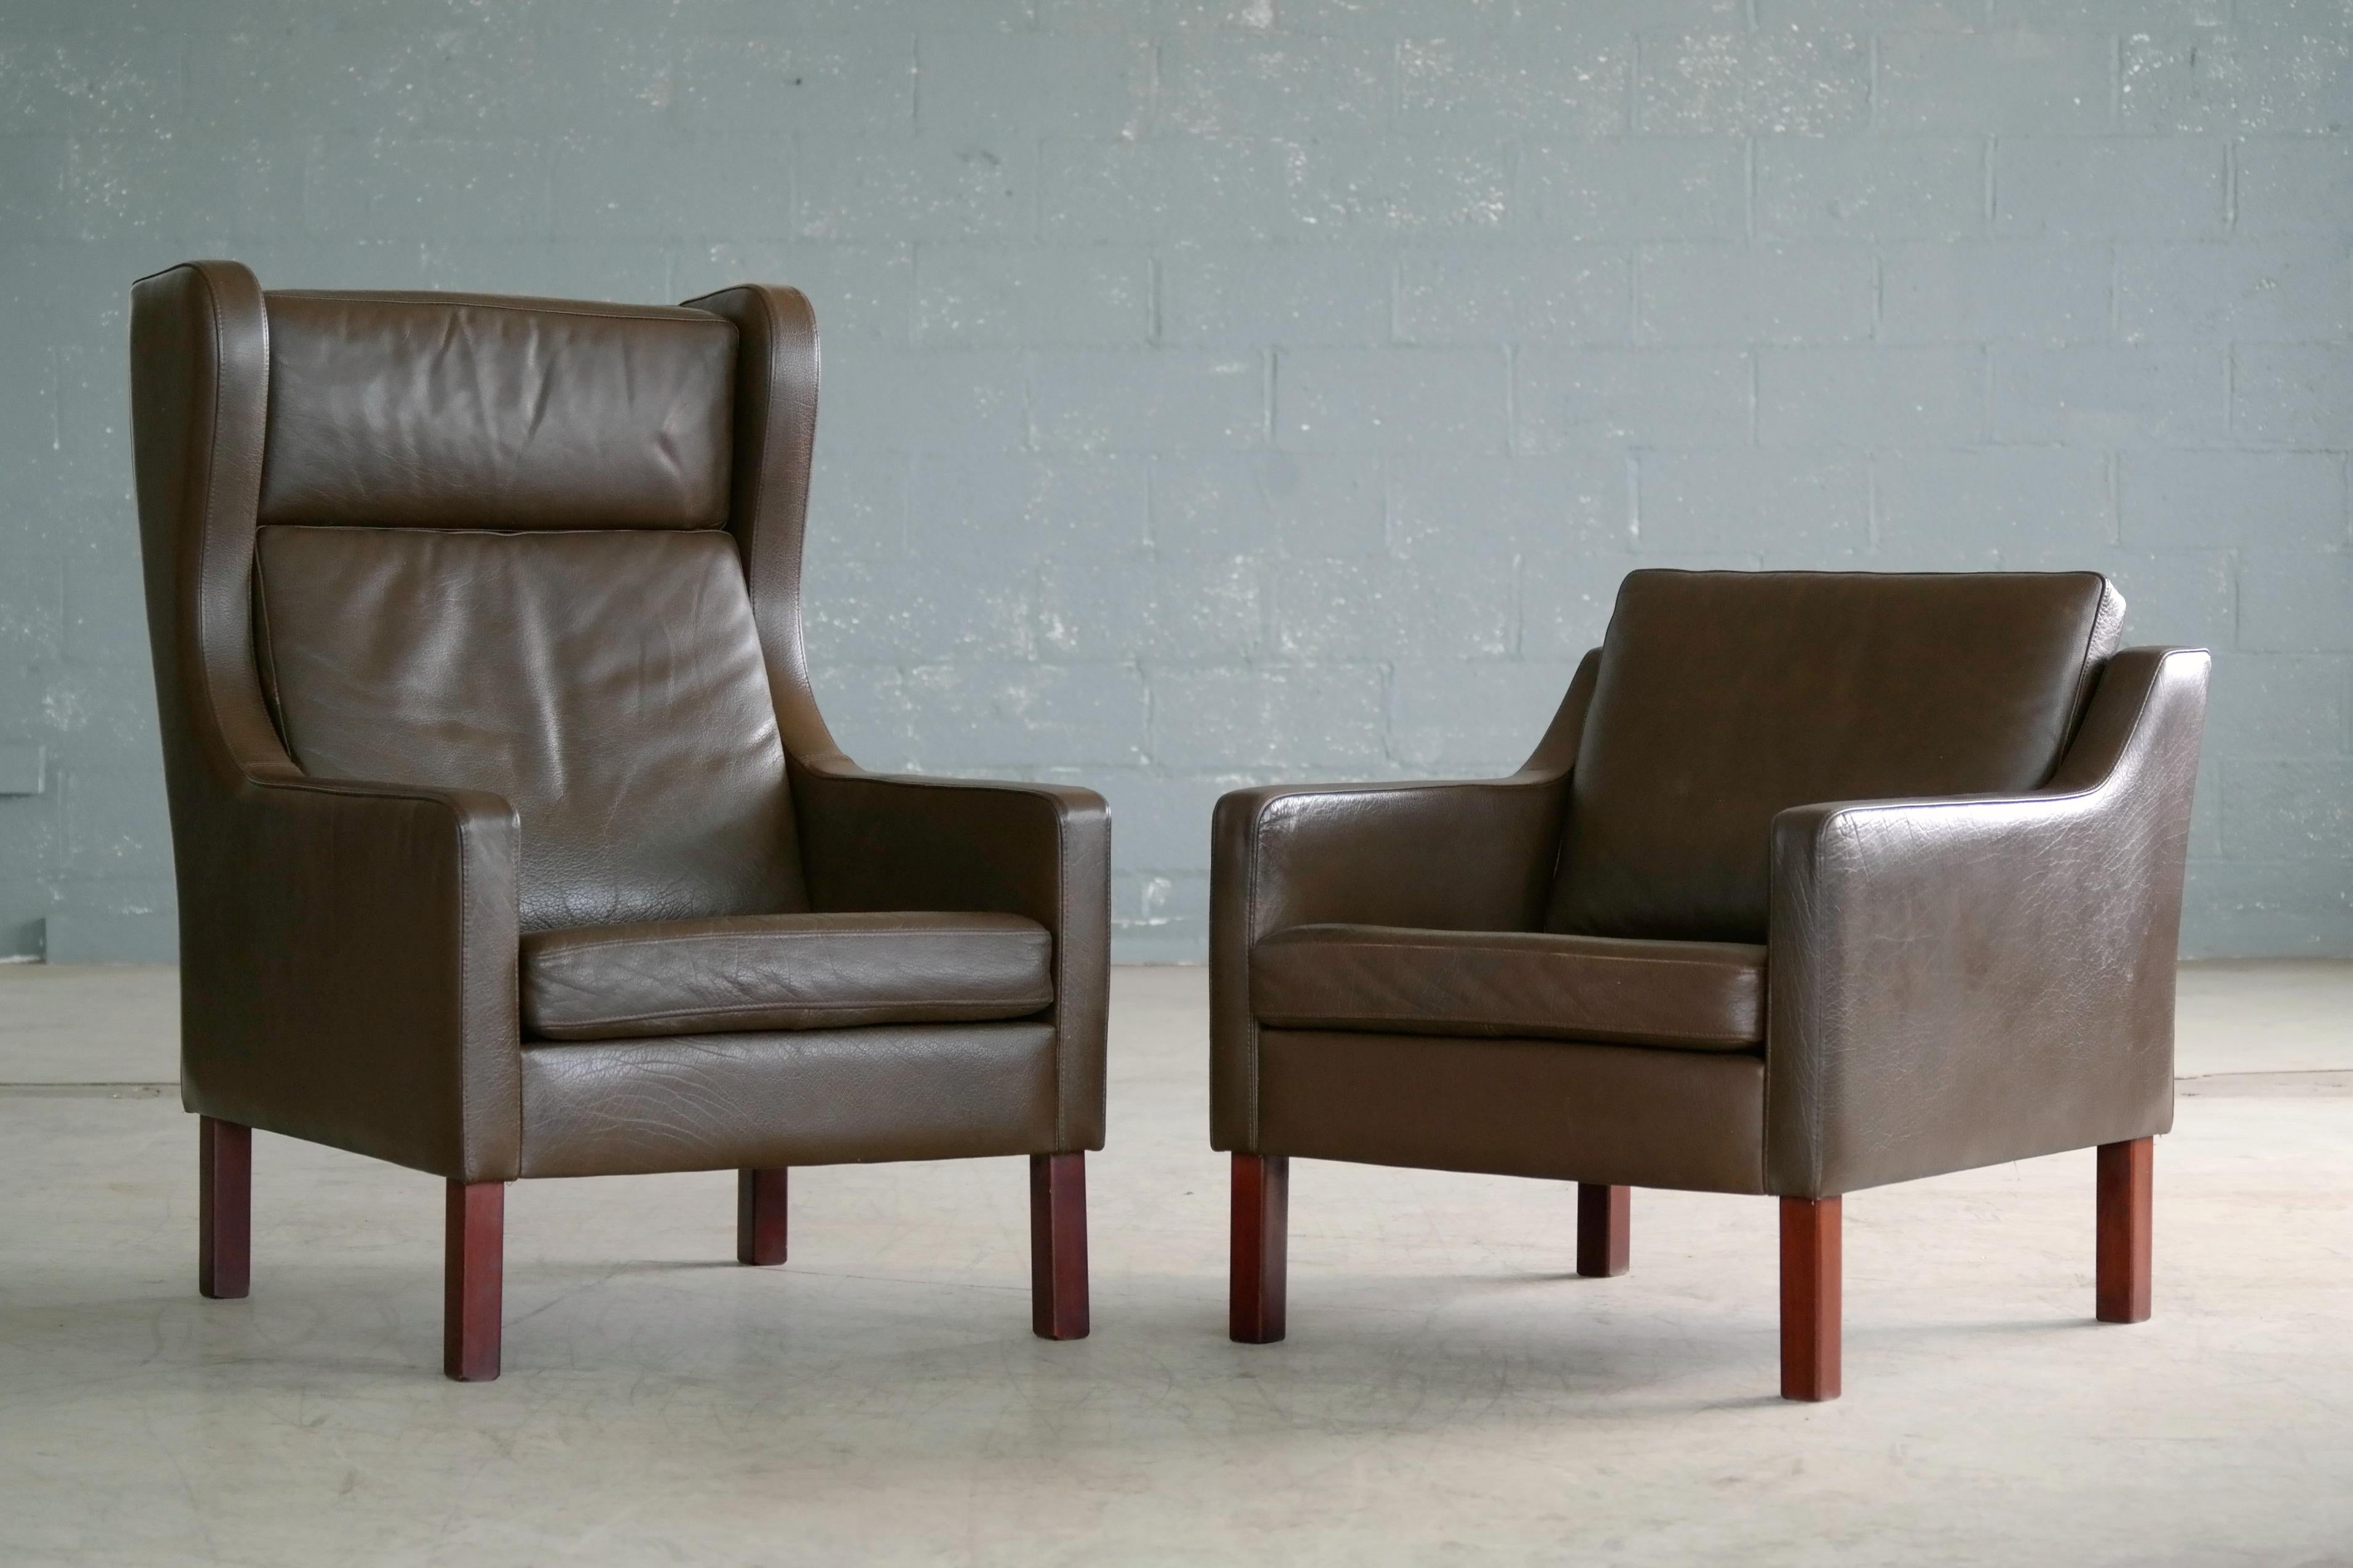 Mogen Hansen produced version of Børge Mogensen's famous lounge chair model 2421 one of the most elegant Classic mid-century Danish lounge chairs ever made. A design that will just never go out of style. Luxurious top grain buffalo leather in a nice